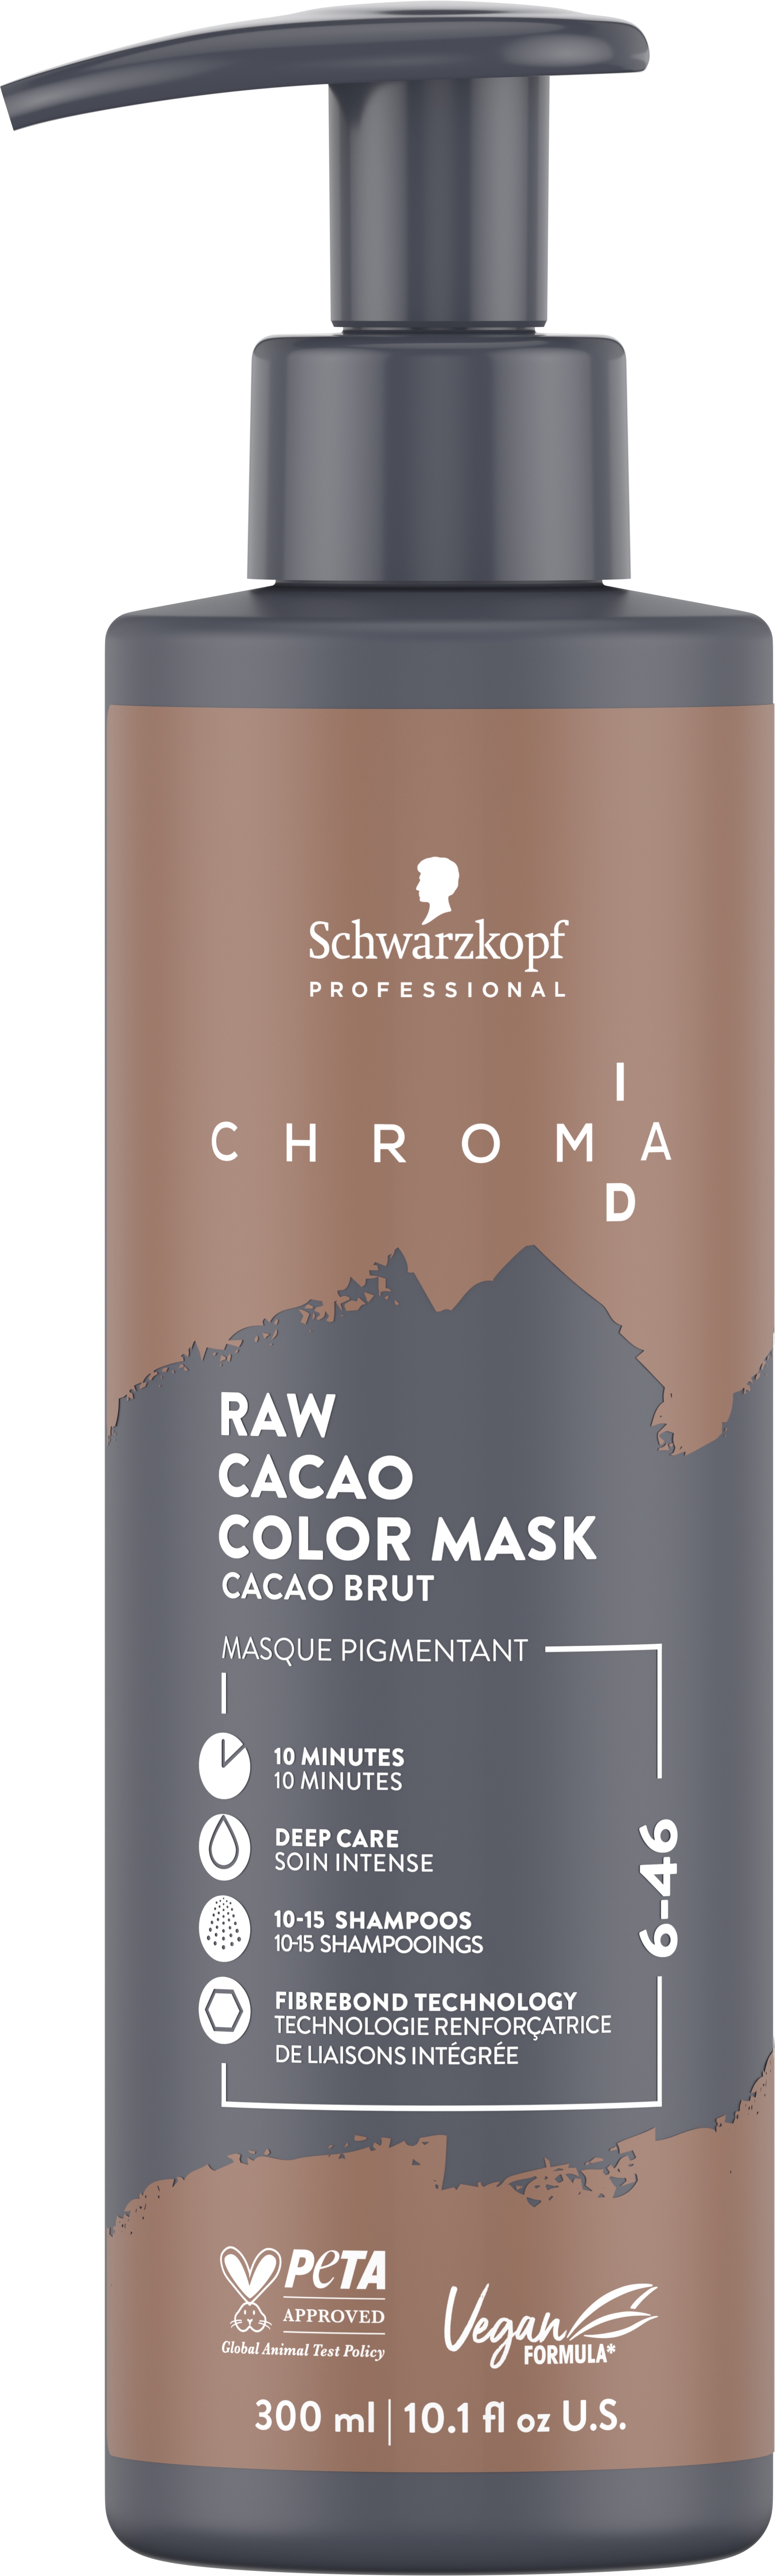 Product image from Chroma ID - Bonding Color Mask 6-46 Raw Cacao